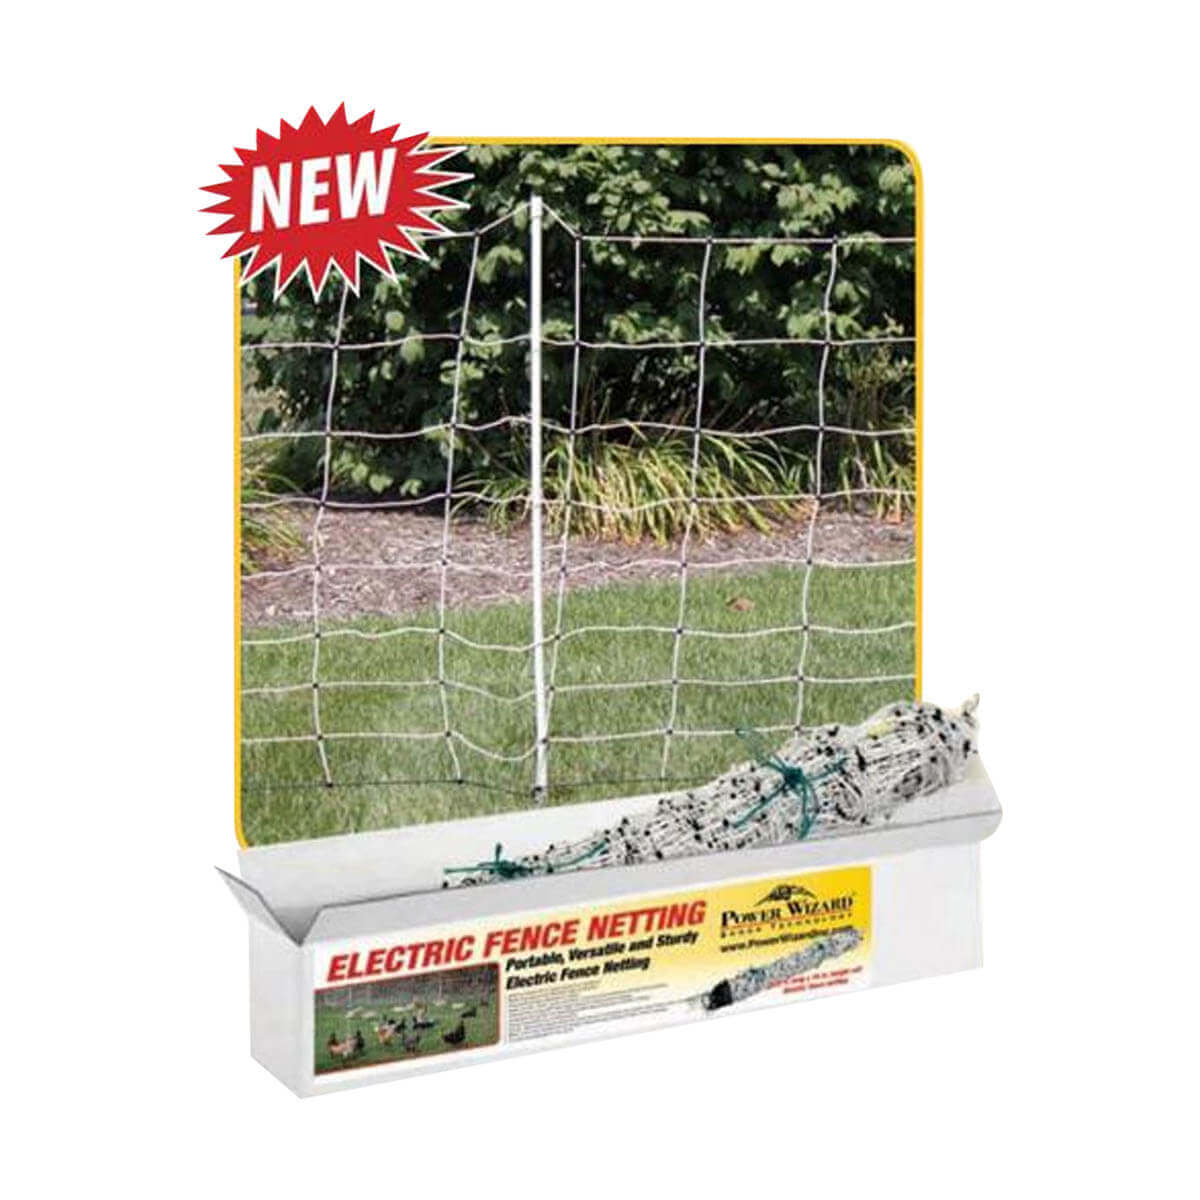 Power Wizard Electric Fence Netting - 120-ft x 34-in